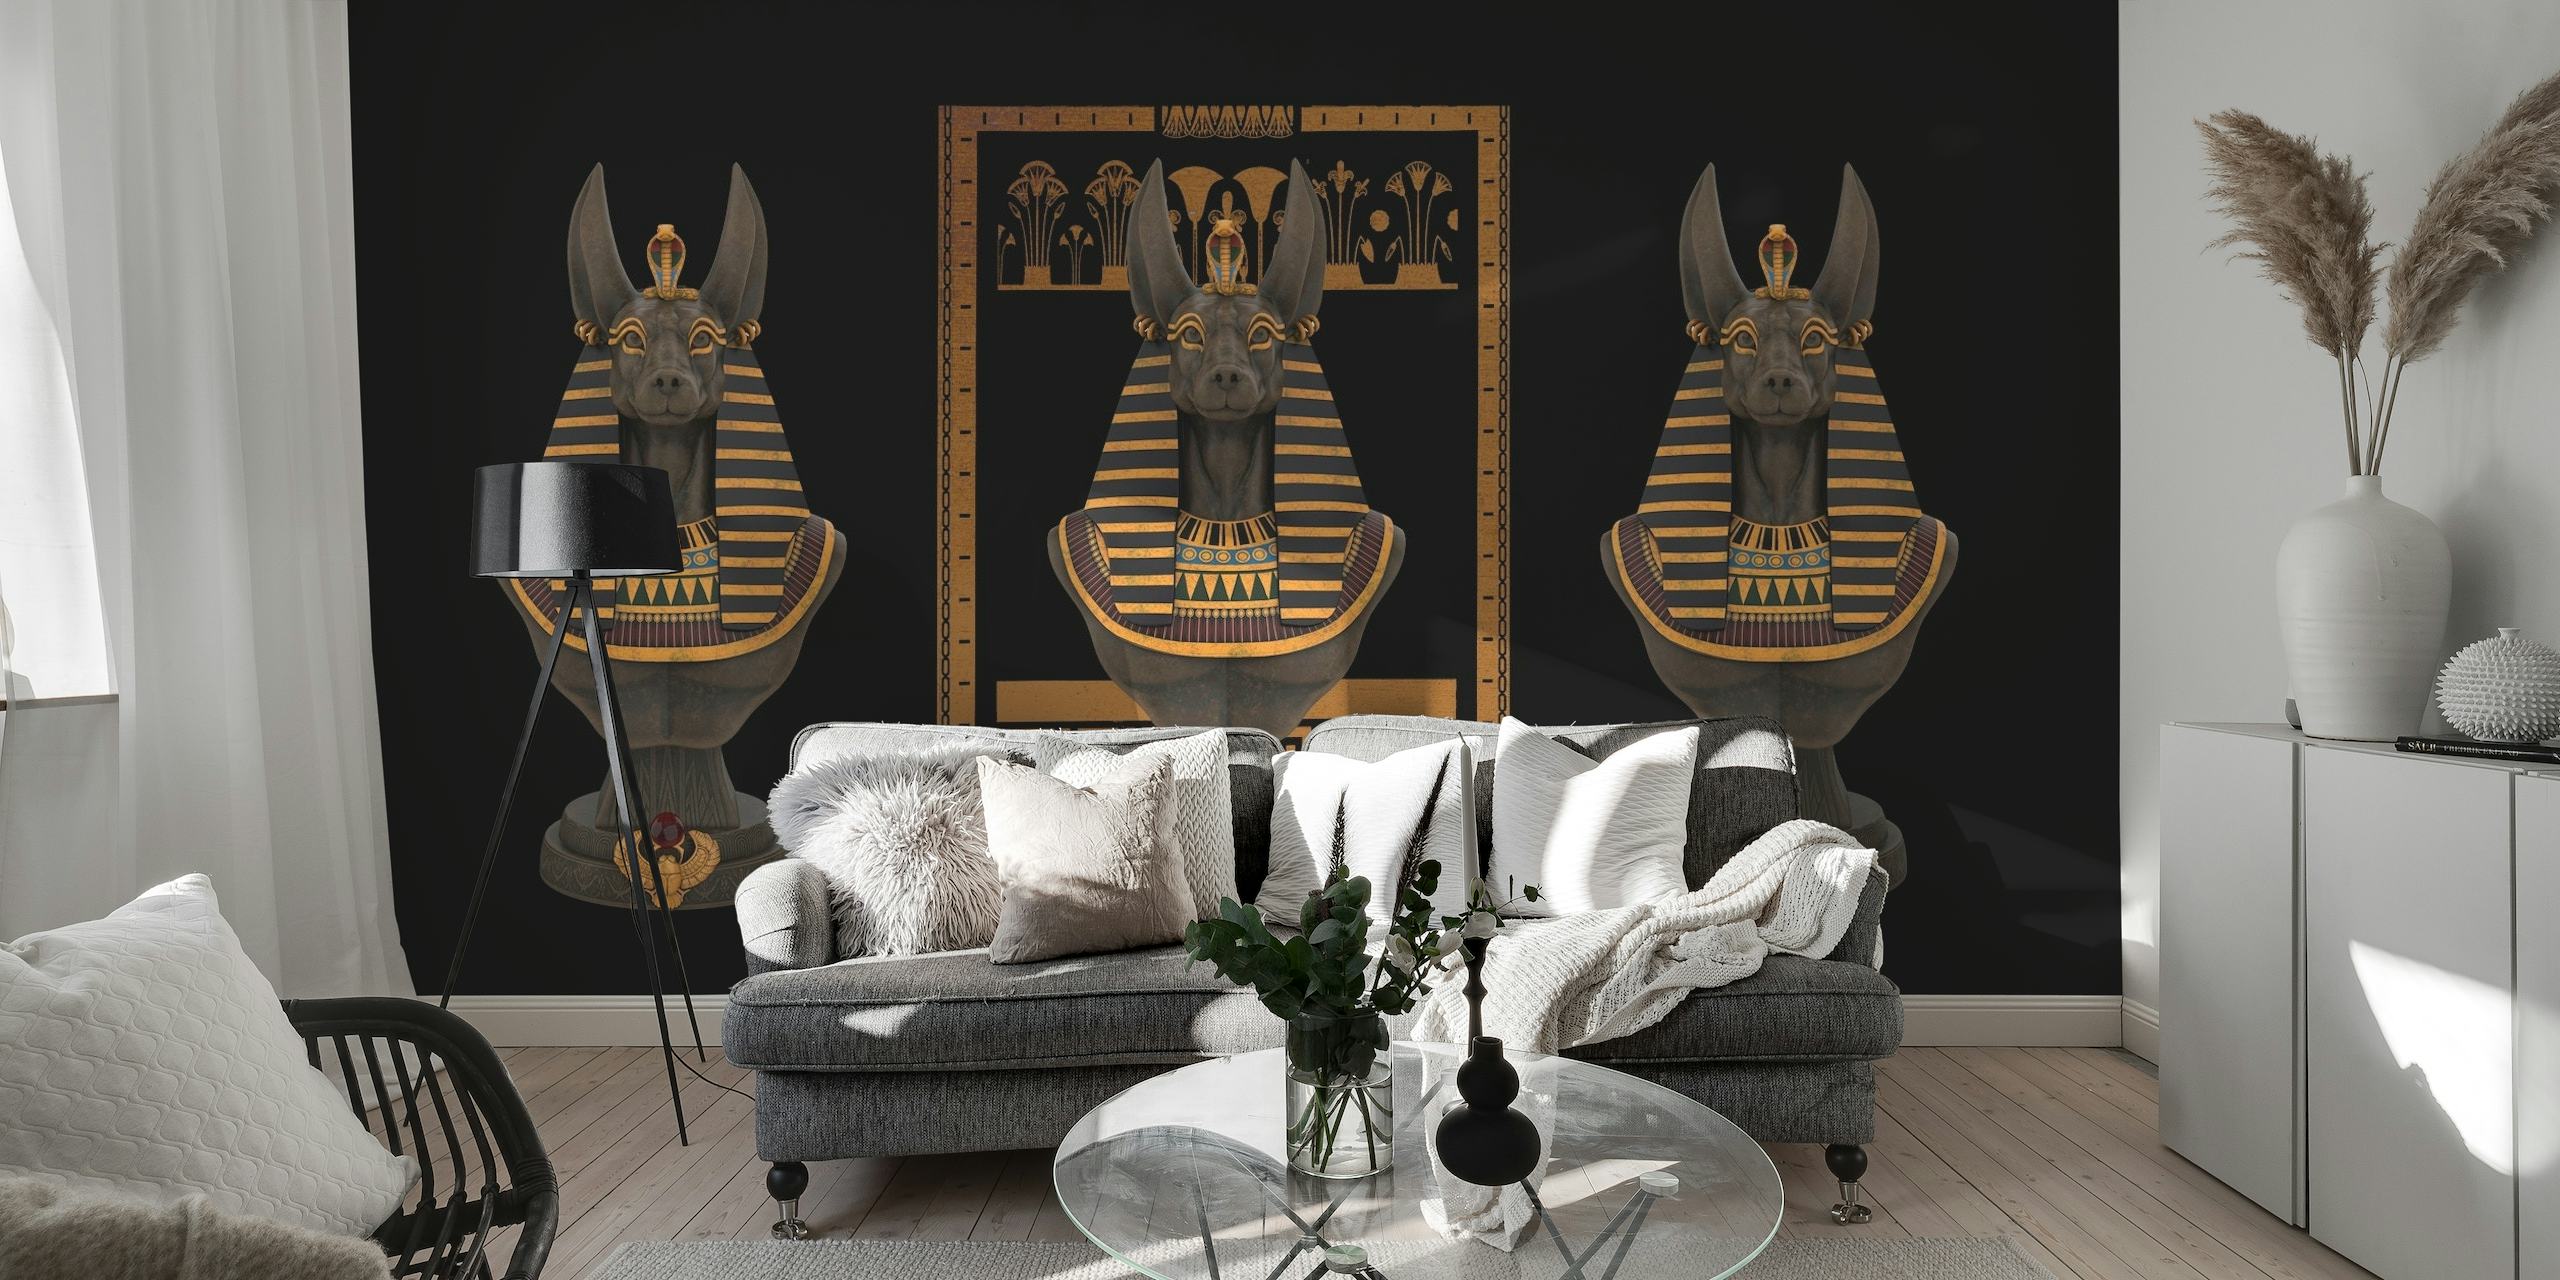 Mystic Egypt wall mural with sphinx statues and hieroglyphs on a black background